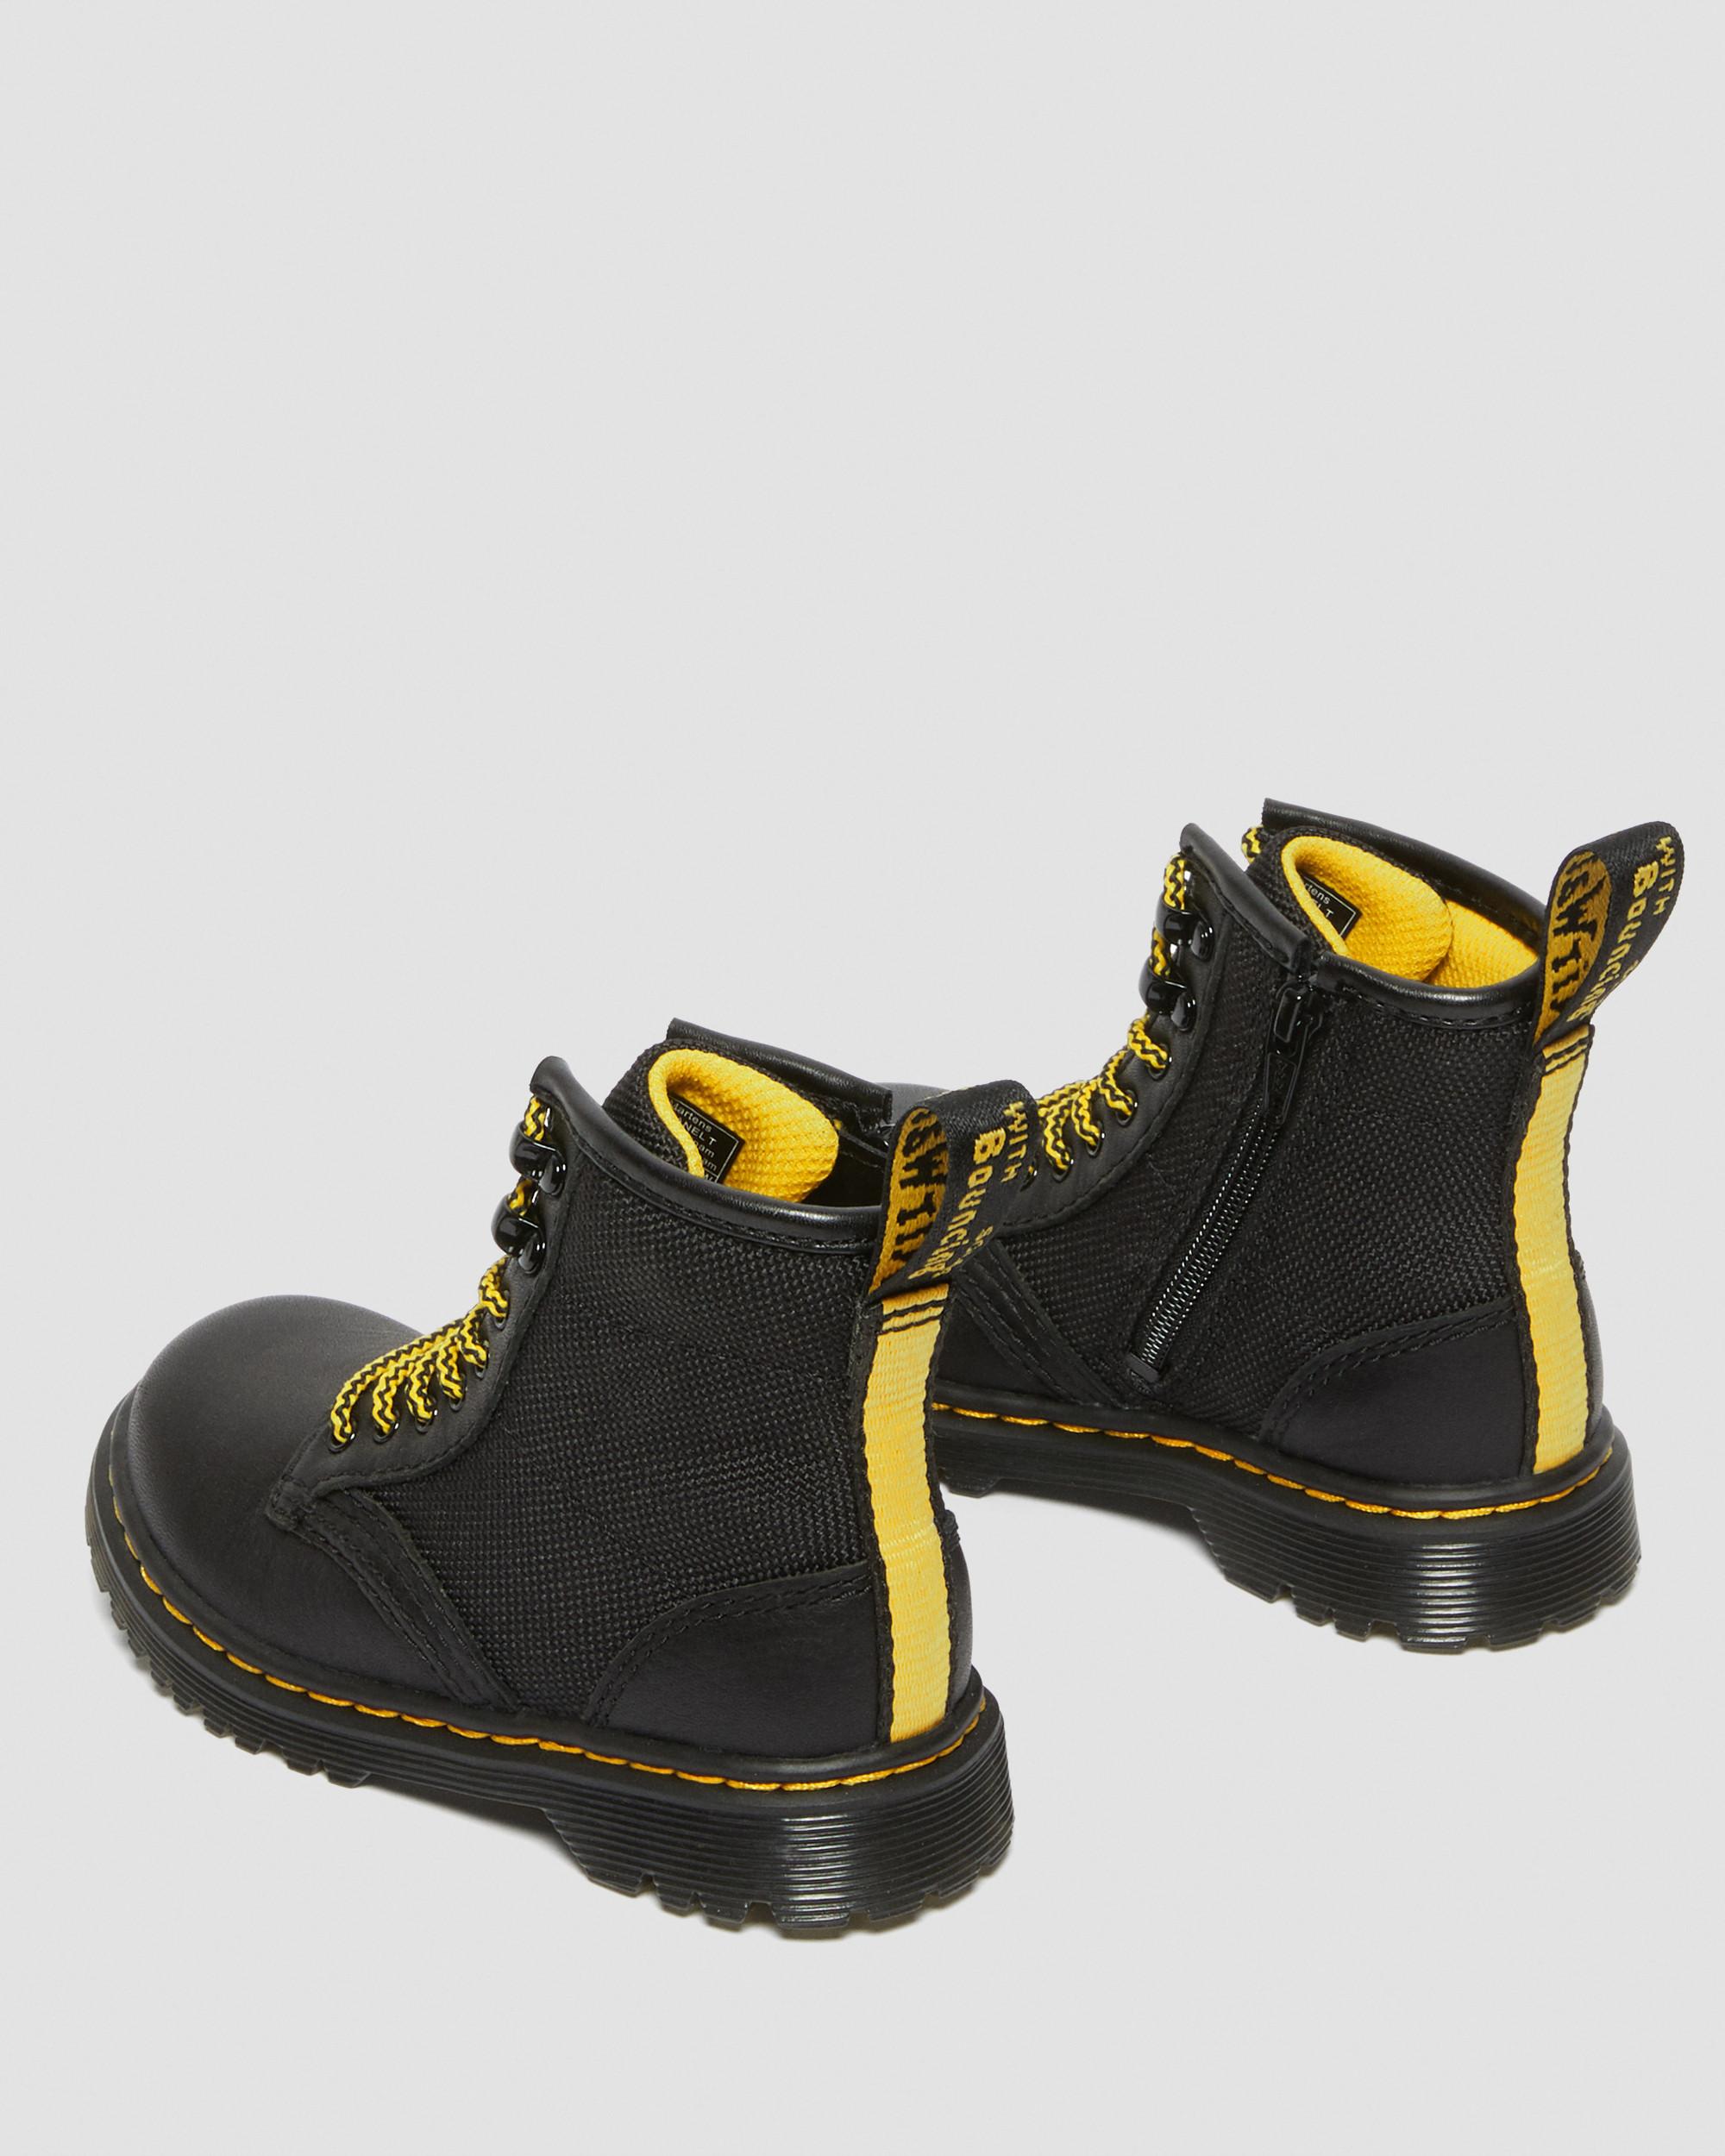 Toddler 1460 Panel Leather Lace Up Boots in Black